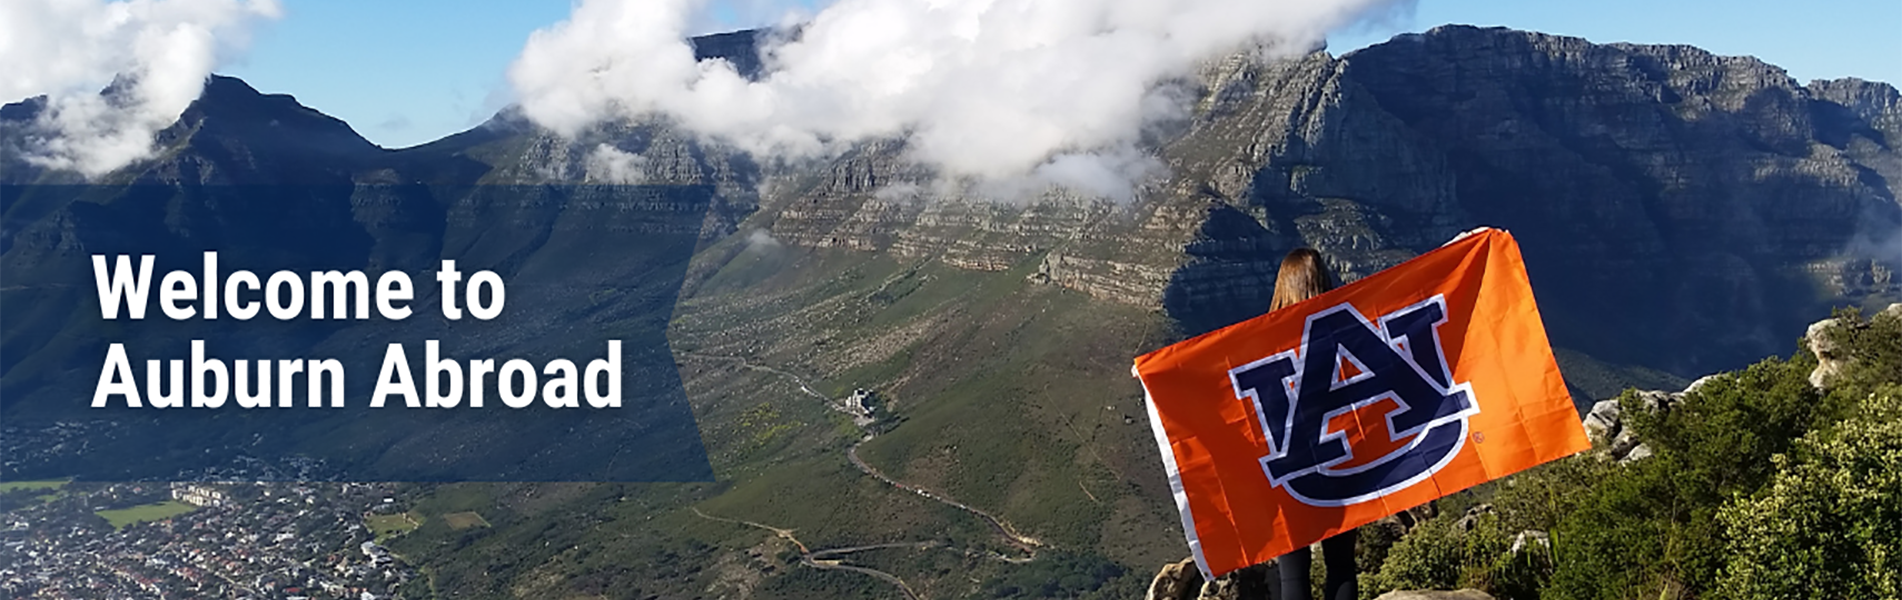 Welcome to Auburn Abroad - image of a student abroad in mountains holding an Auburn flag